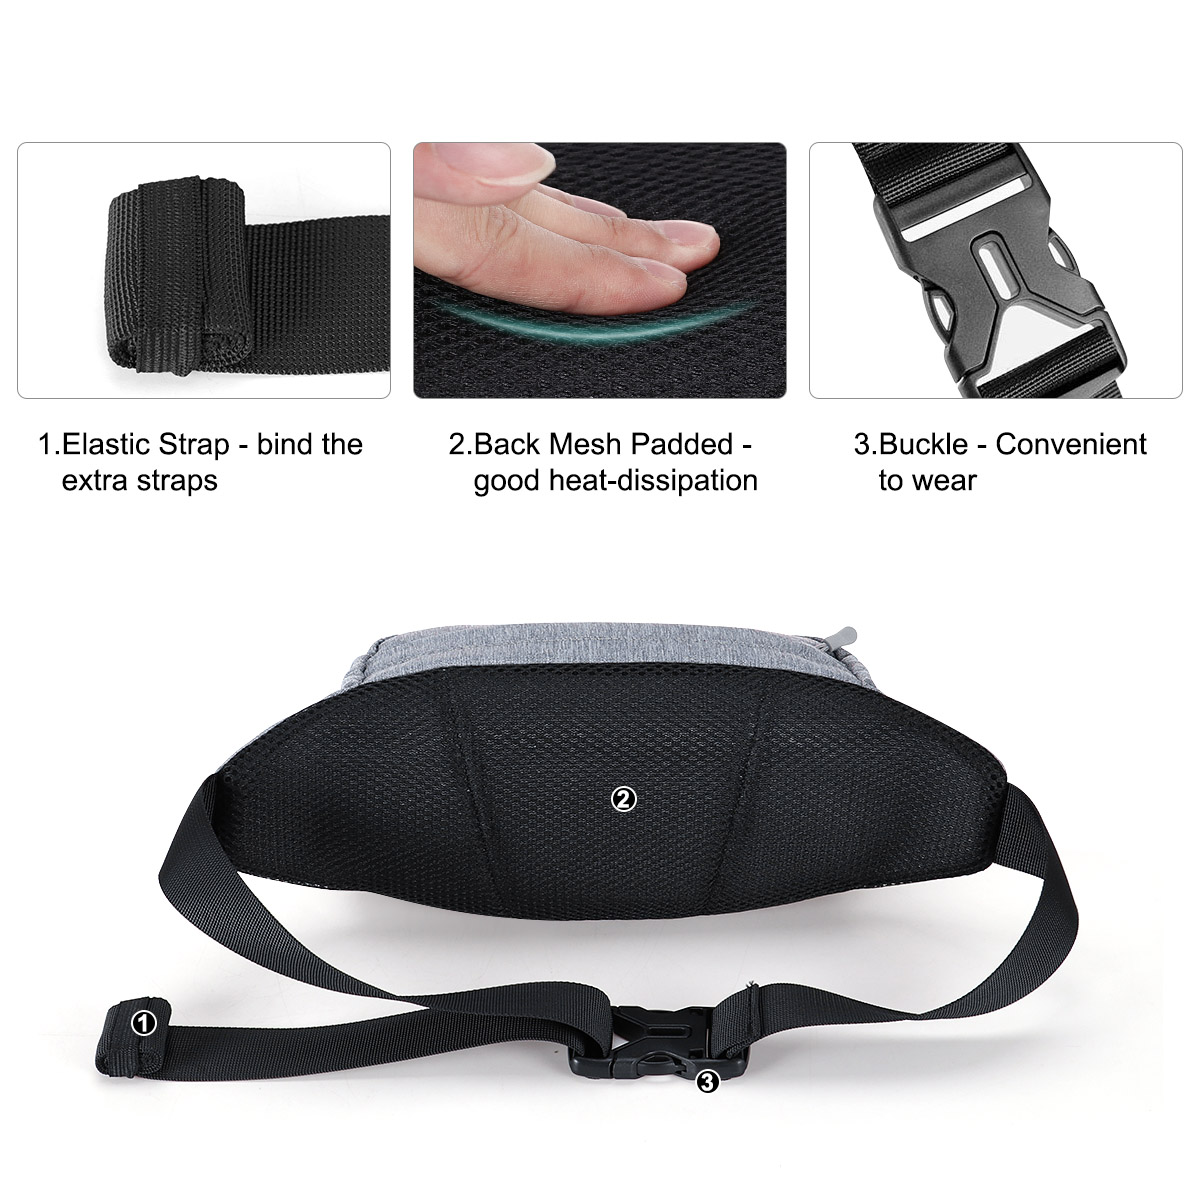 HAWEE Unisex Fanny Pack-Crossbody Sling Backpack Running Waist Pack Belt Hip Bag for Travel Sport Hiking Cycling - image 3 of 6